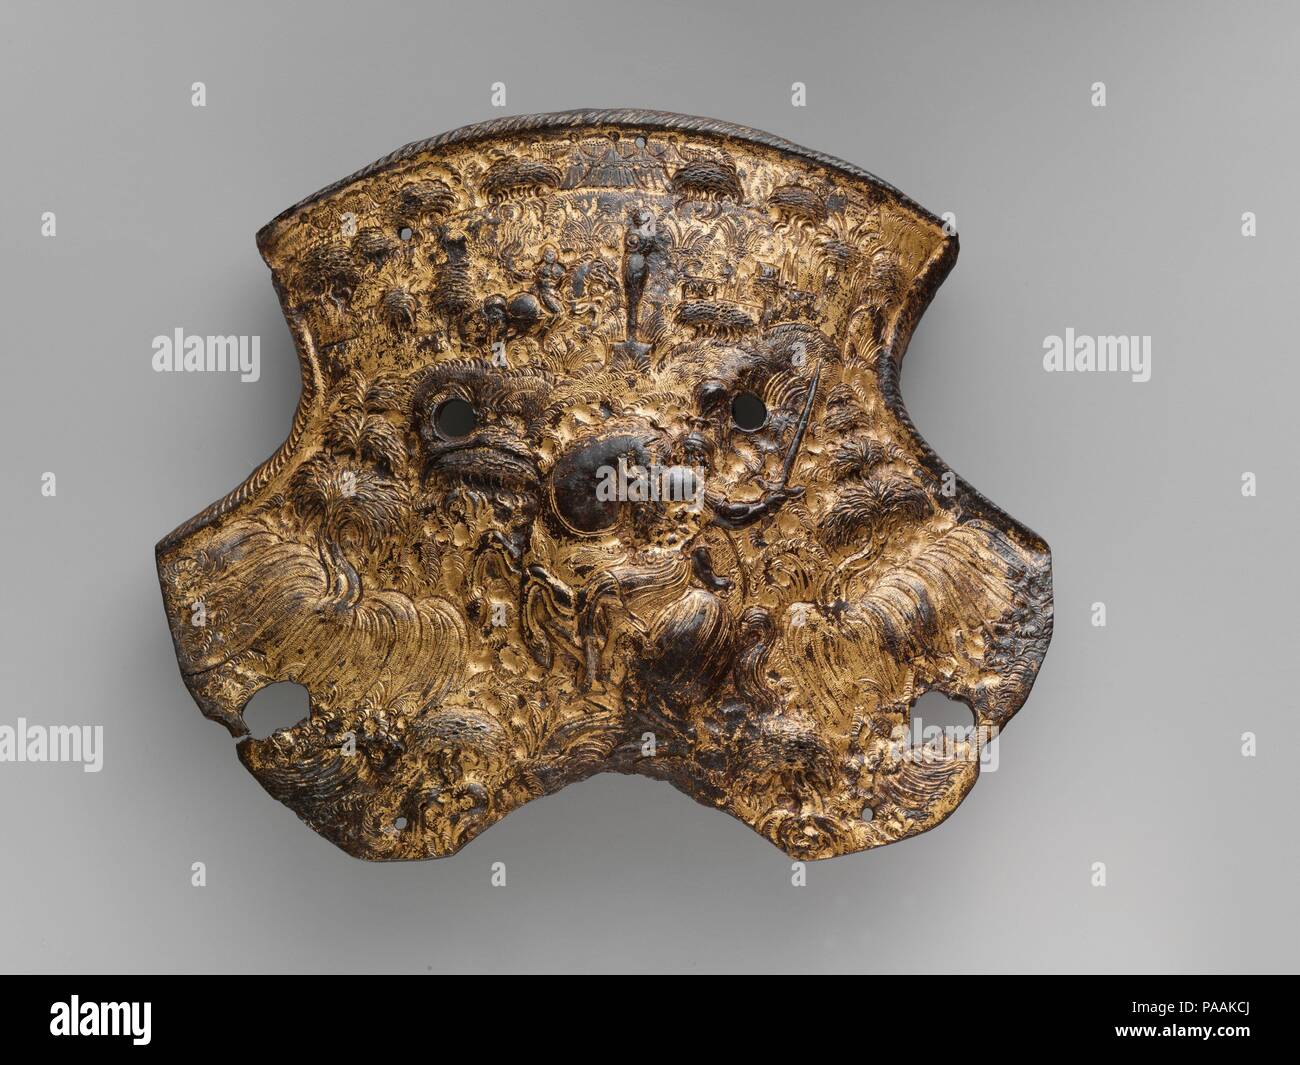 Pommel Plate. Culture: French or Flemish. Dimensions: 8 3/4 x 7 in. (22.2 x 17.8 cm); Wt. 12 oz. (352 g). Date: ca. 1580.  Very few saddle steels are decorated with embossed ornament including figural representations or narrative scenes. The densely detailed style of this pommel plate is a notable example, allowing it to be identified as part of a small group of rare parade armors that were made in France or Flanders in the last quarter of the sixteenth century.  The subjects depicted are derived from Classical history and mythology. In the center of the Museum's pommel plate is a prominent fi Stock Photo